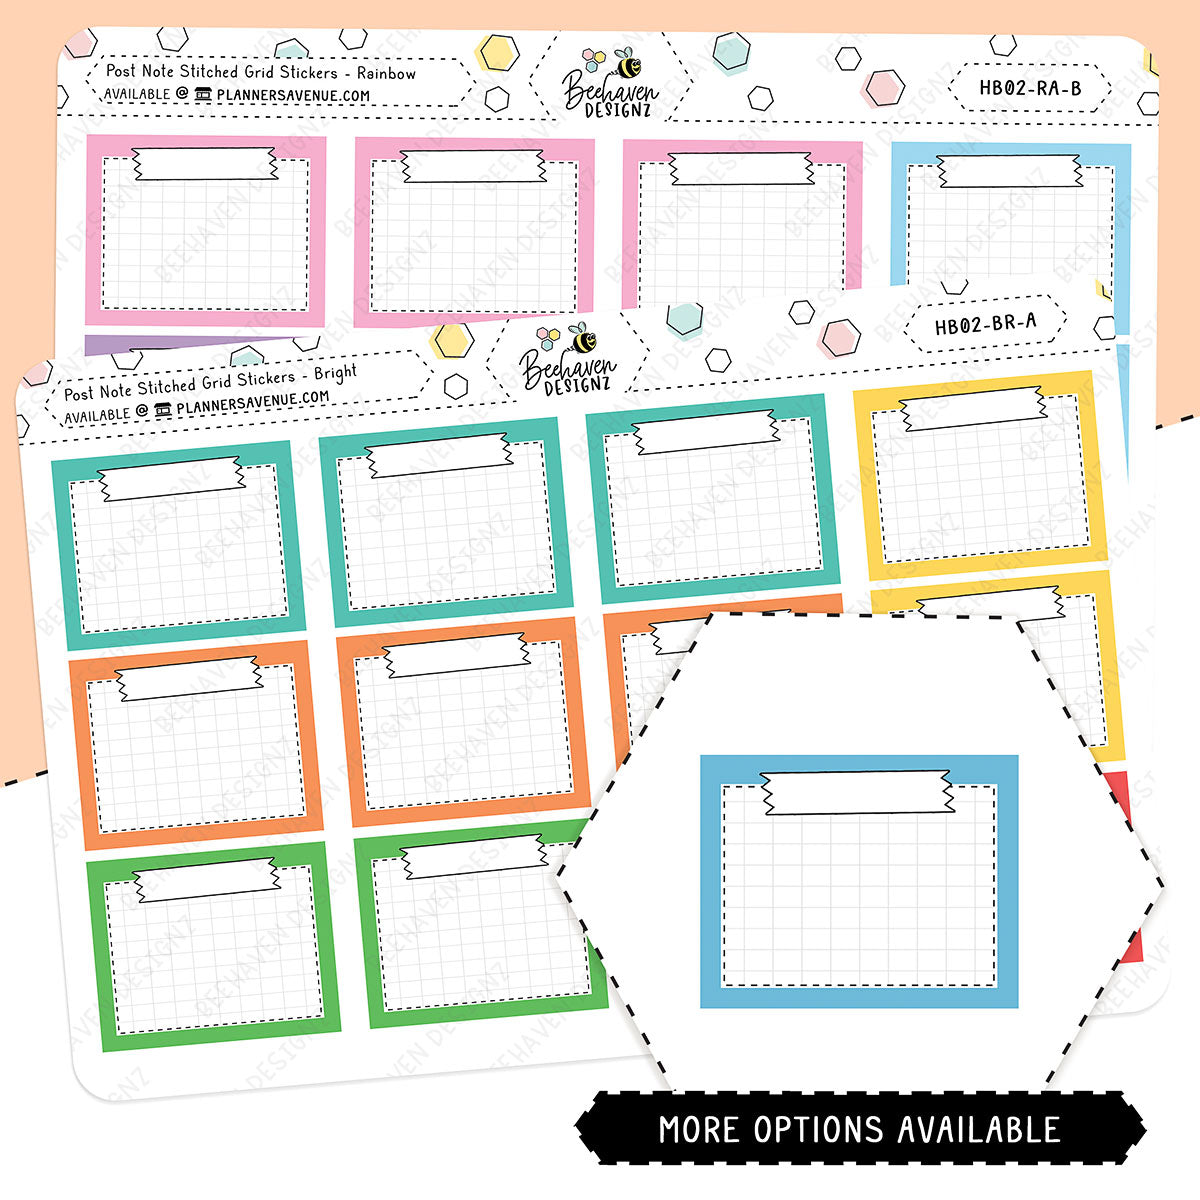 Post Note Stitched Grid Planner Stickers